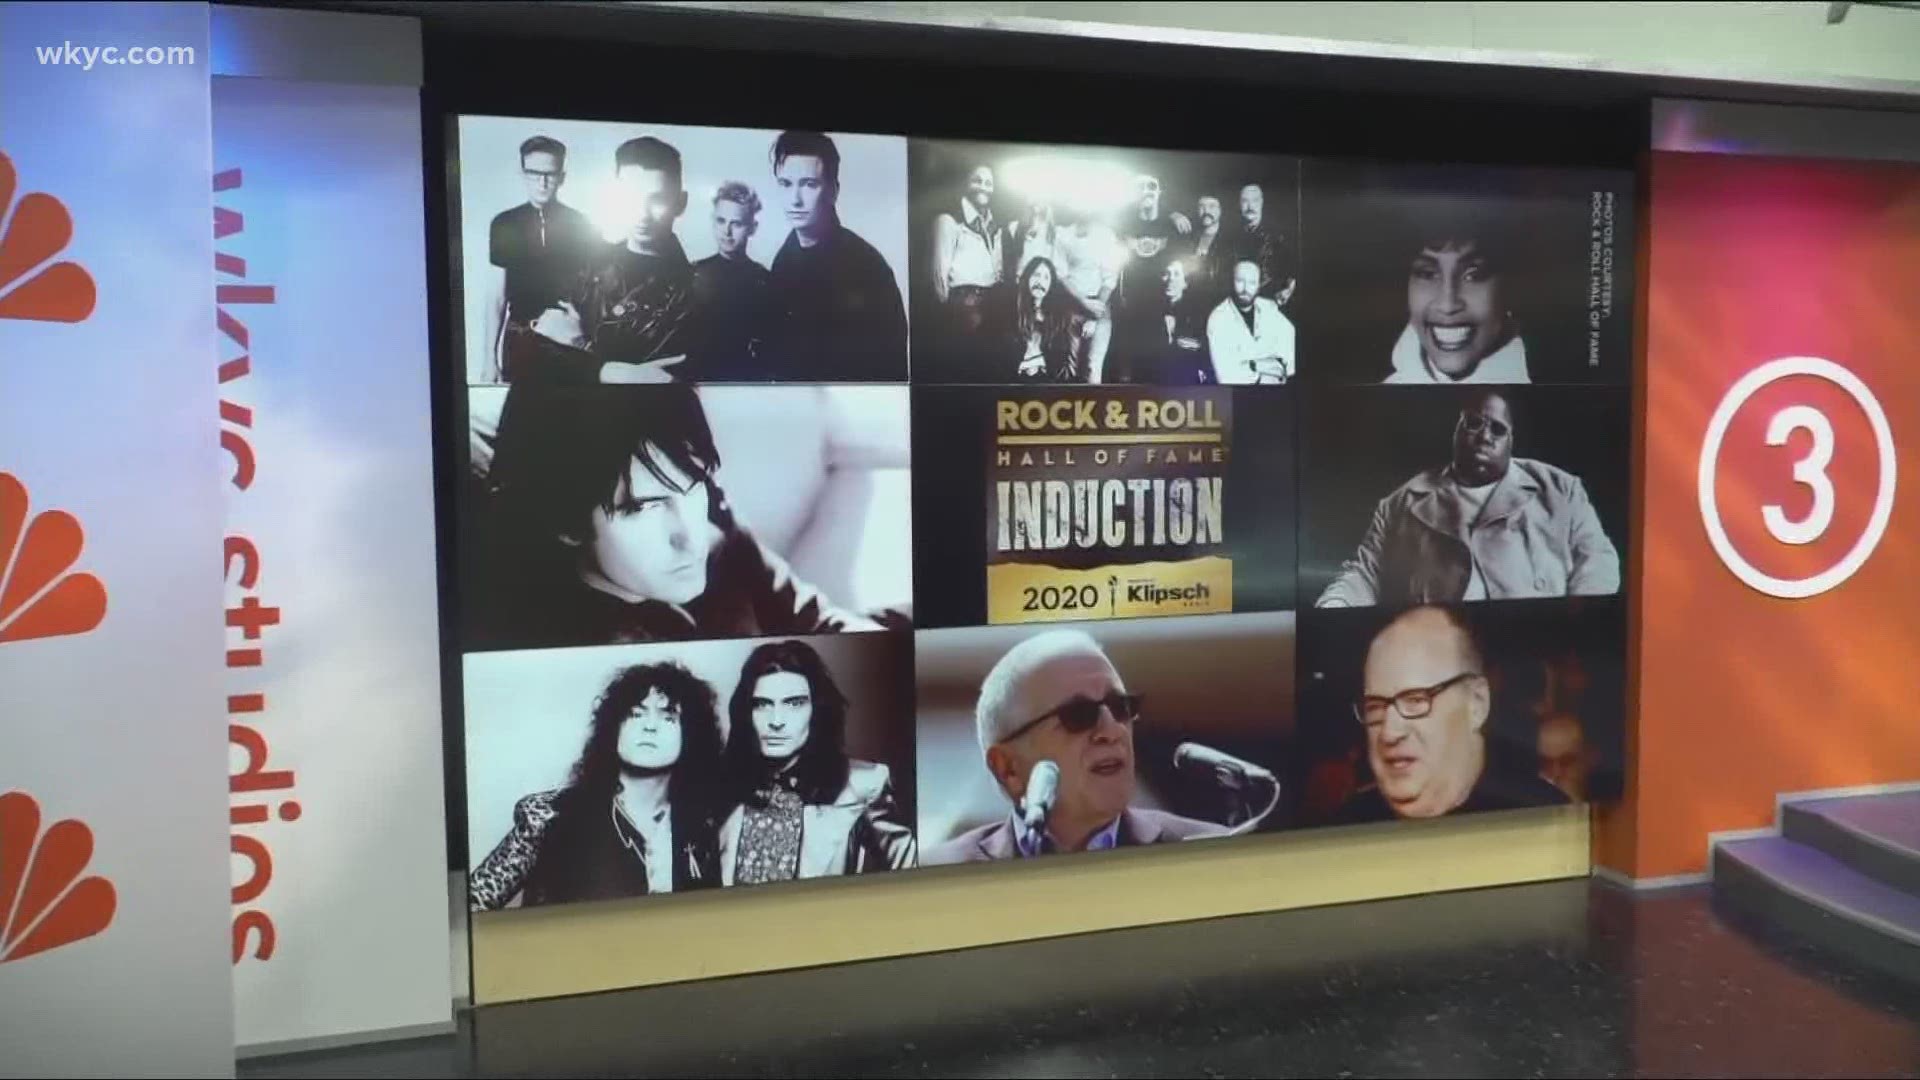 The 2021 Rock Hall induction ceremony will take place in Cleveland next fall. Andrew Horansky has the details.